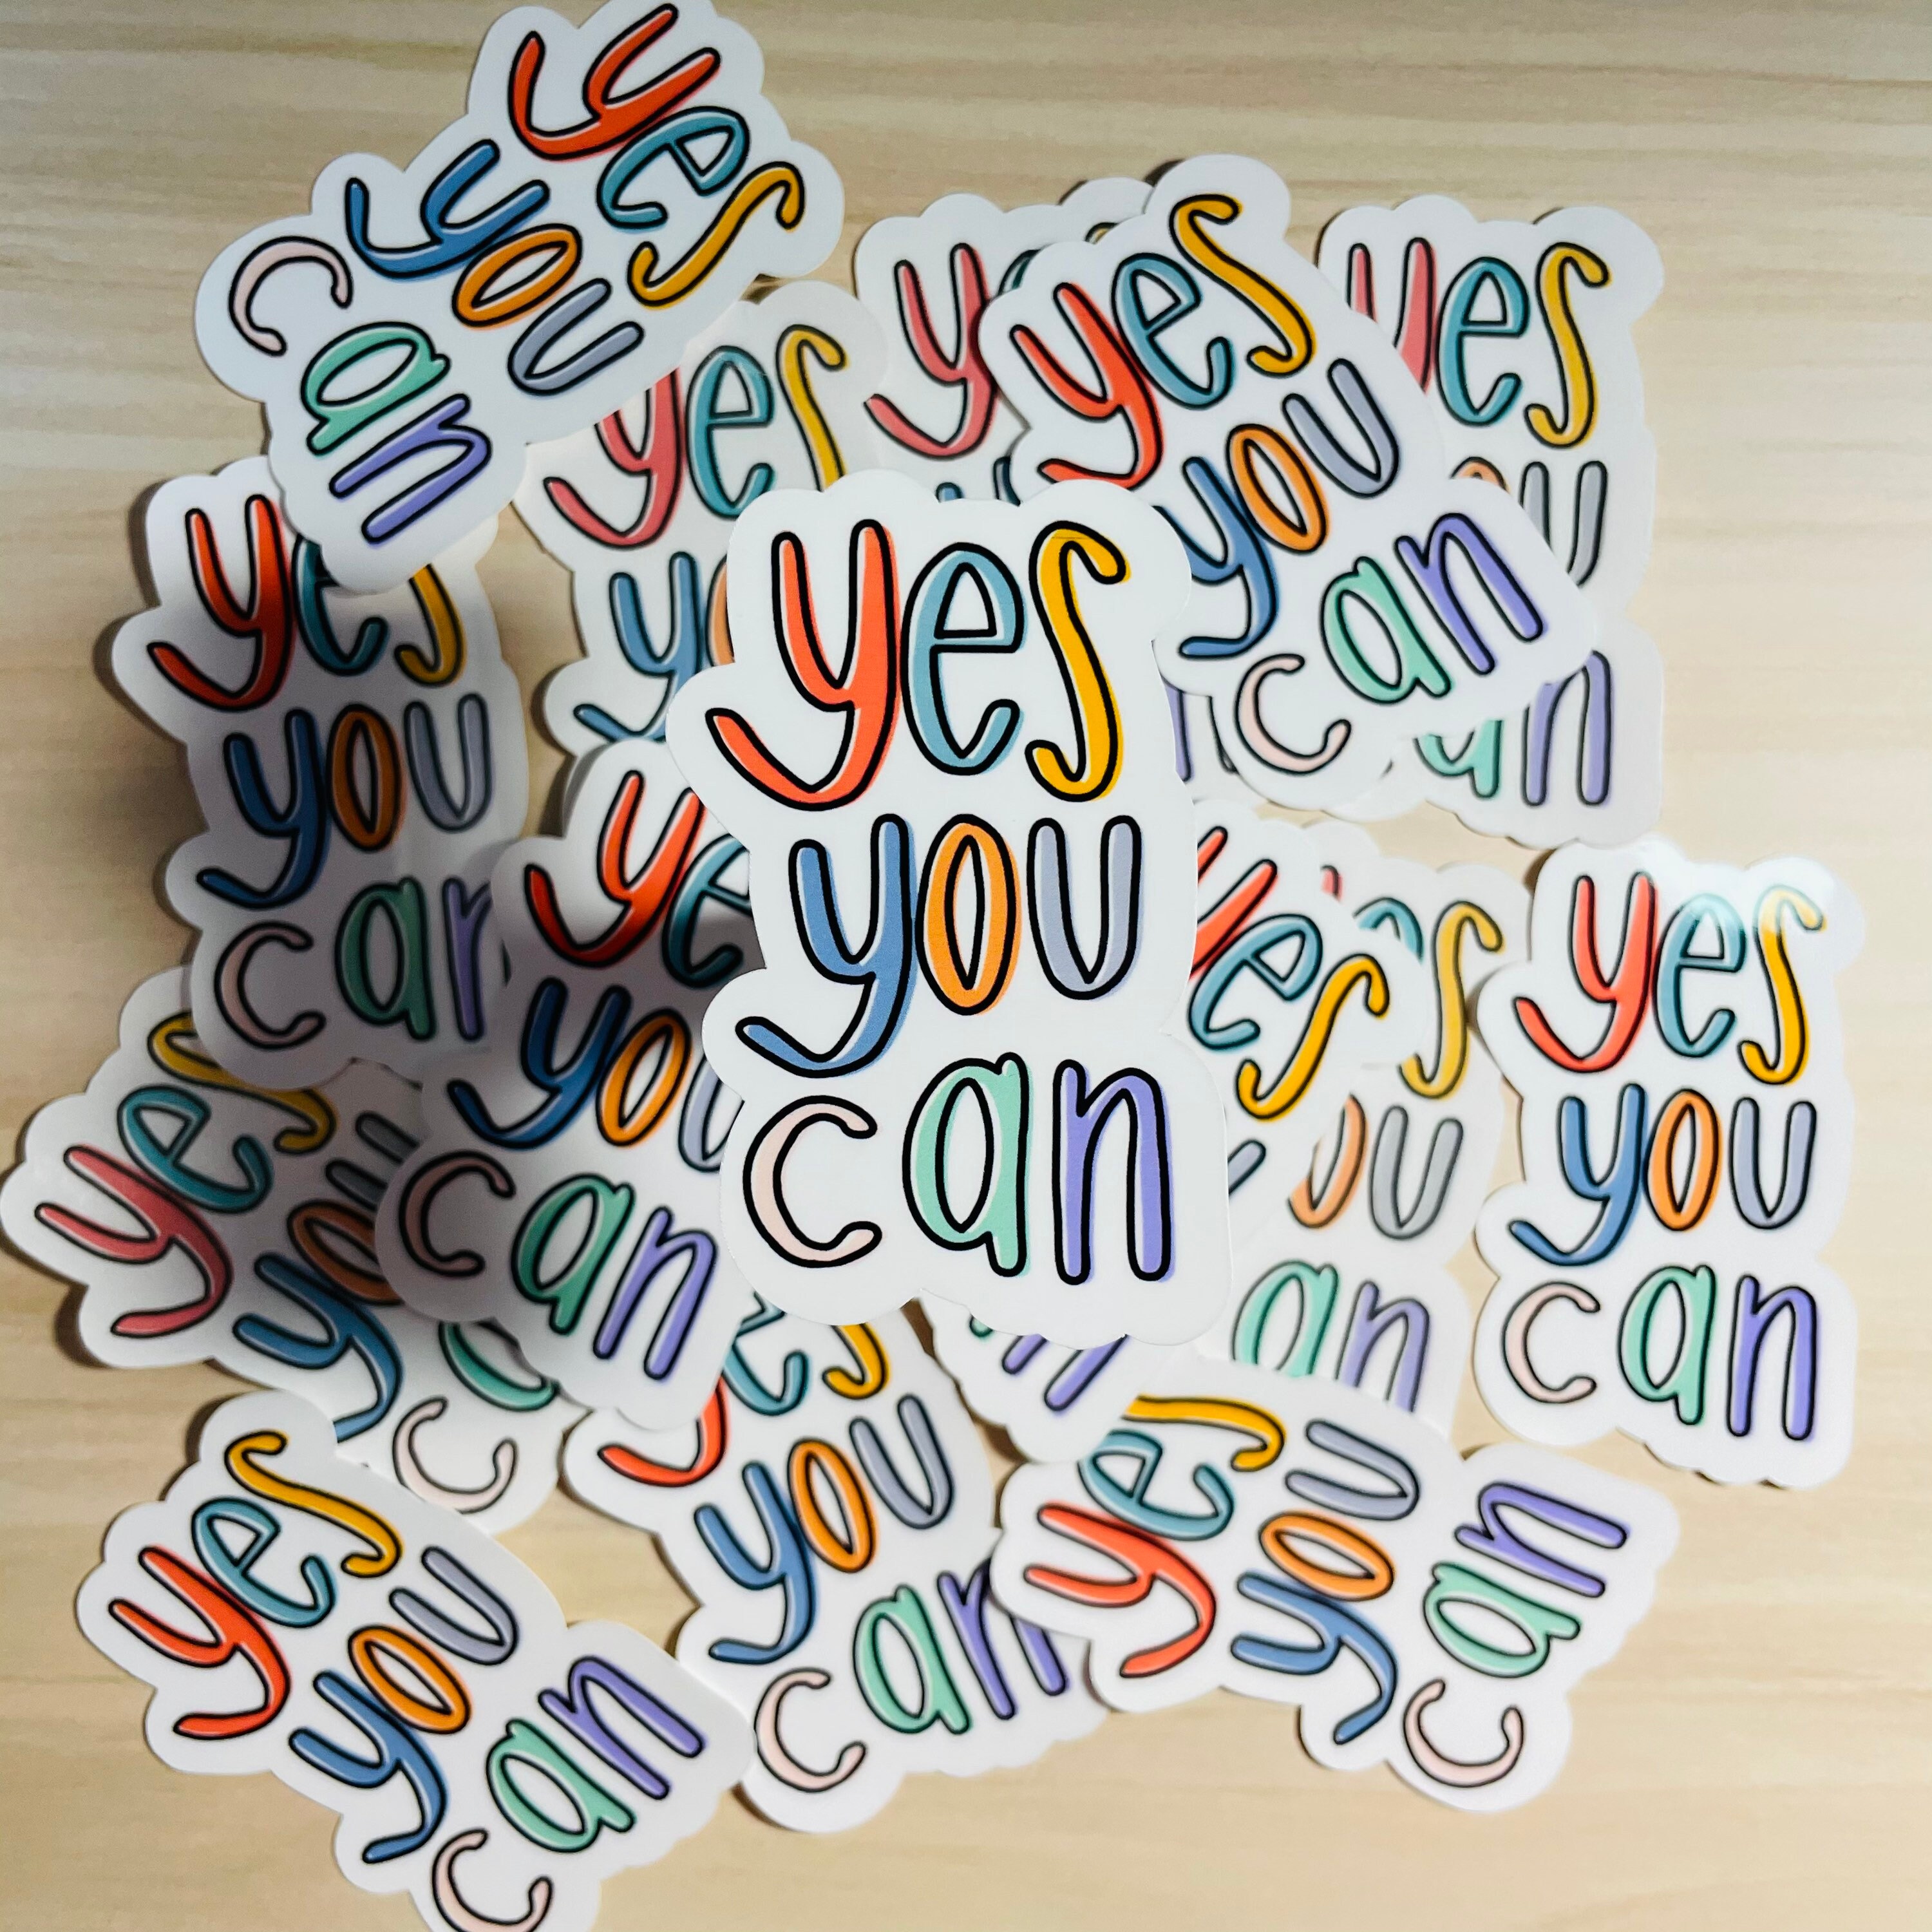 yes you can Sticker for Sale by emmagracehodge